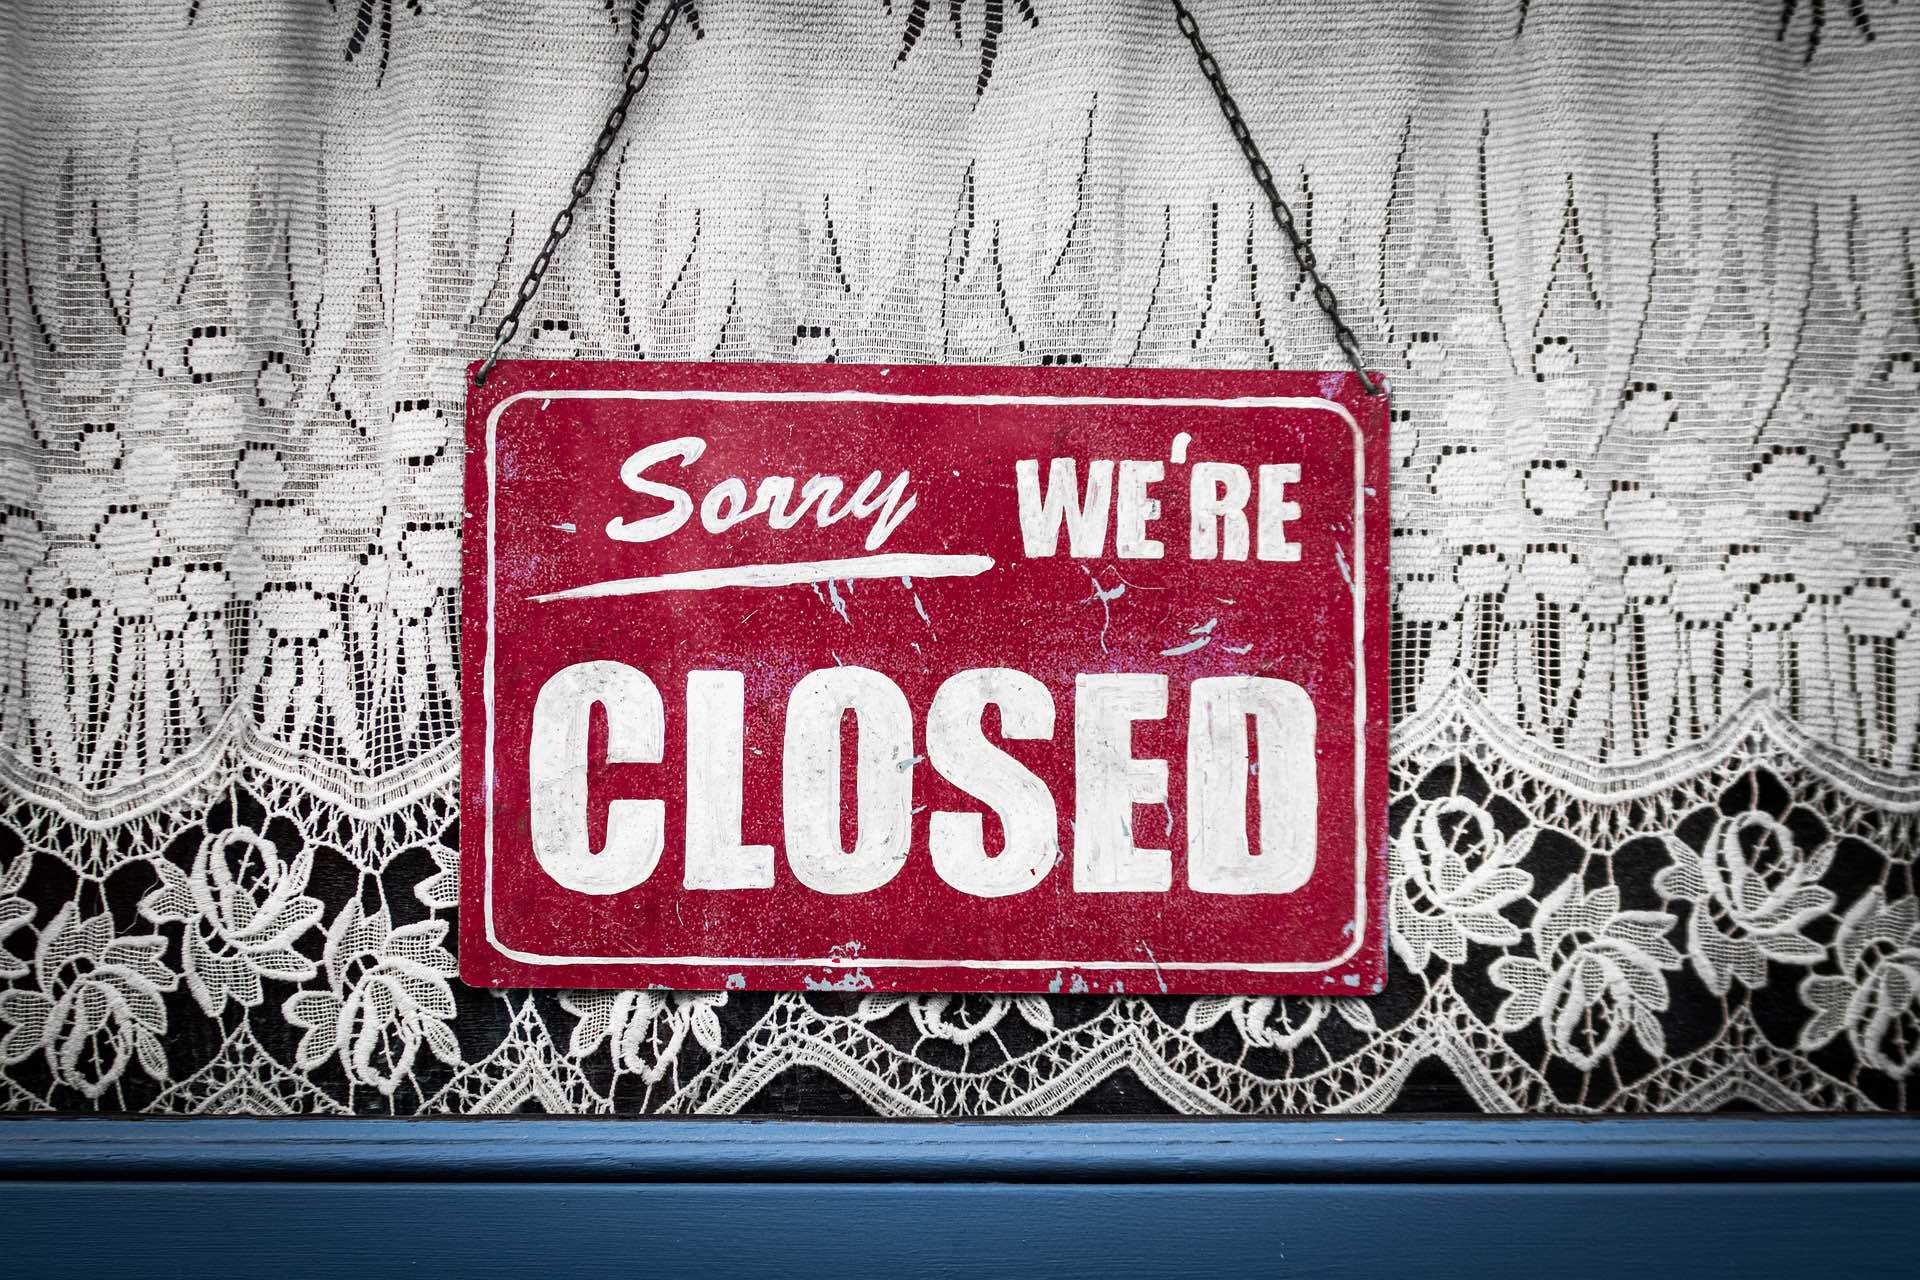 A red "sorry, we're closed sign" is hung in front of a lacy curtain